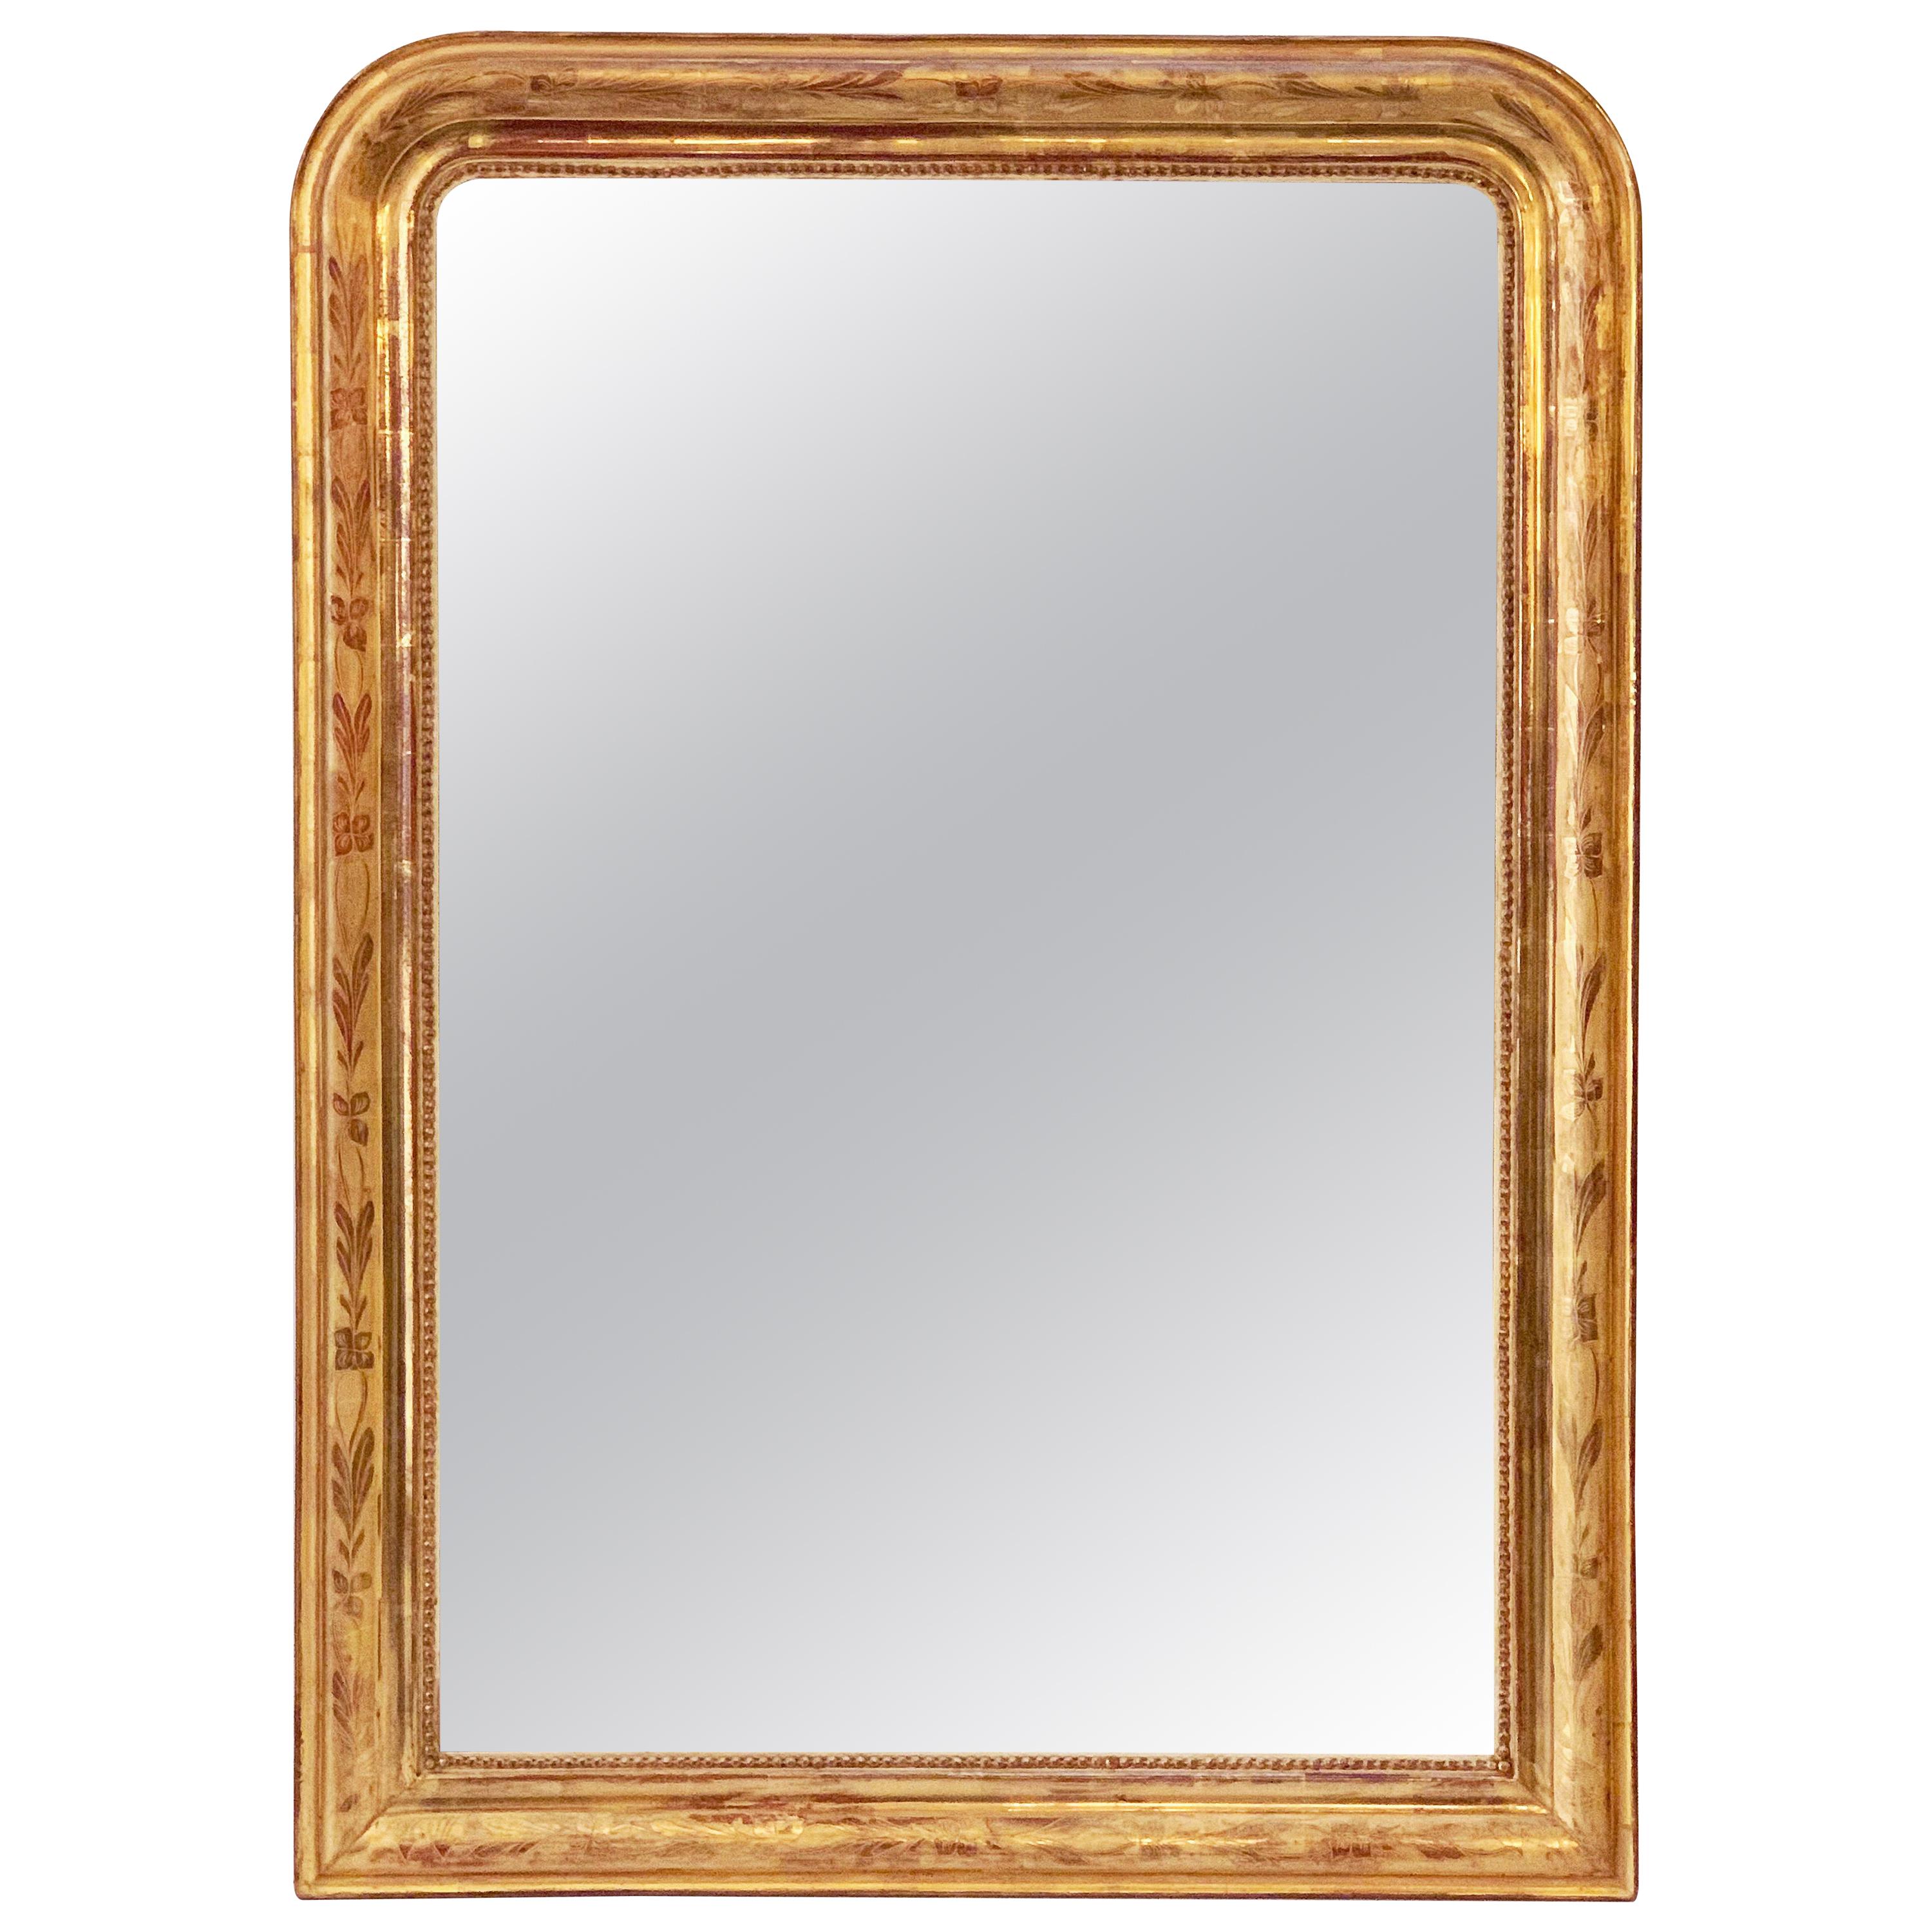 Large Louis Philippe Arch Top Gilt Mirror (H 55 1/4 x W 40)